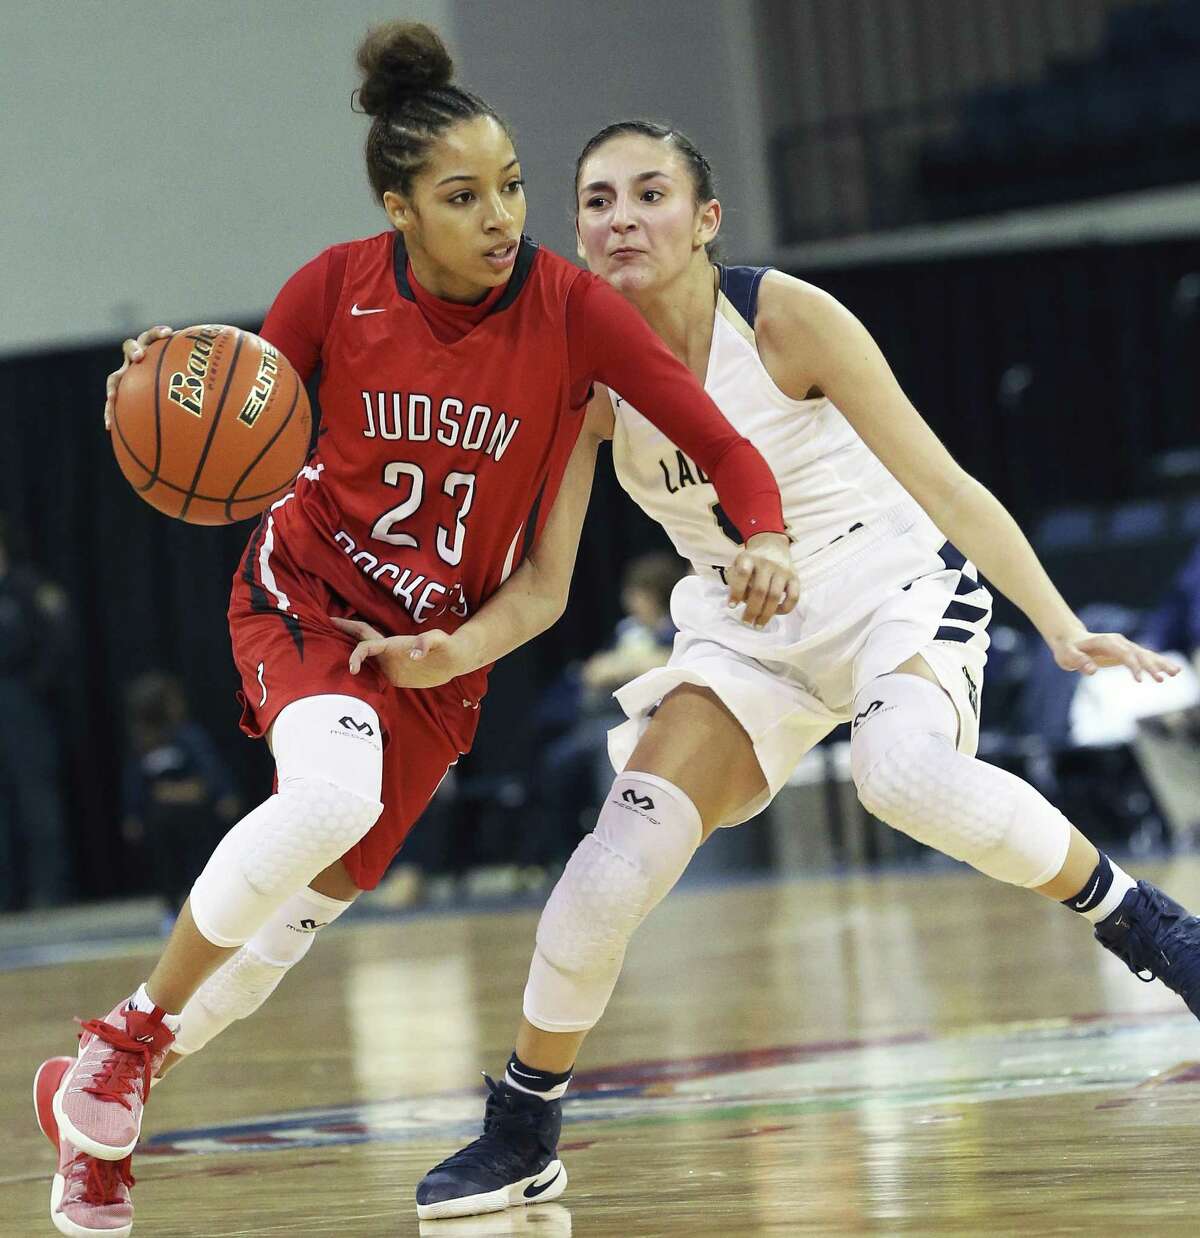 “It took a lot of hard work and playing as a team,” senior guard Chantel Govan (left) said of Jud son reaching state. The Rockets were the No. 3 playoff seed out of District 27-6A as co-champs.